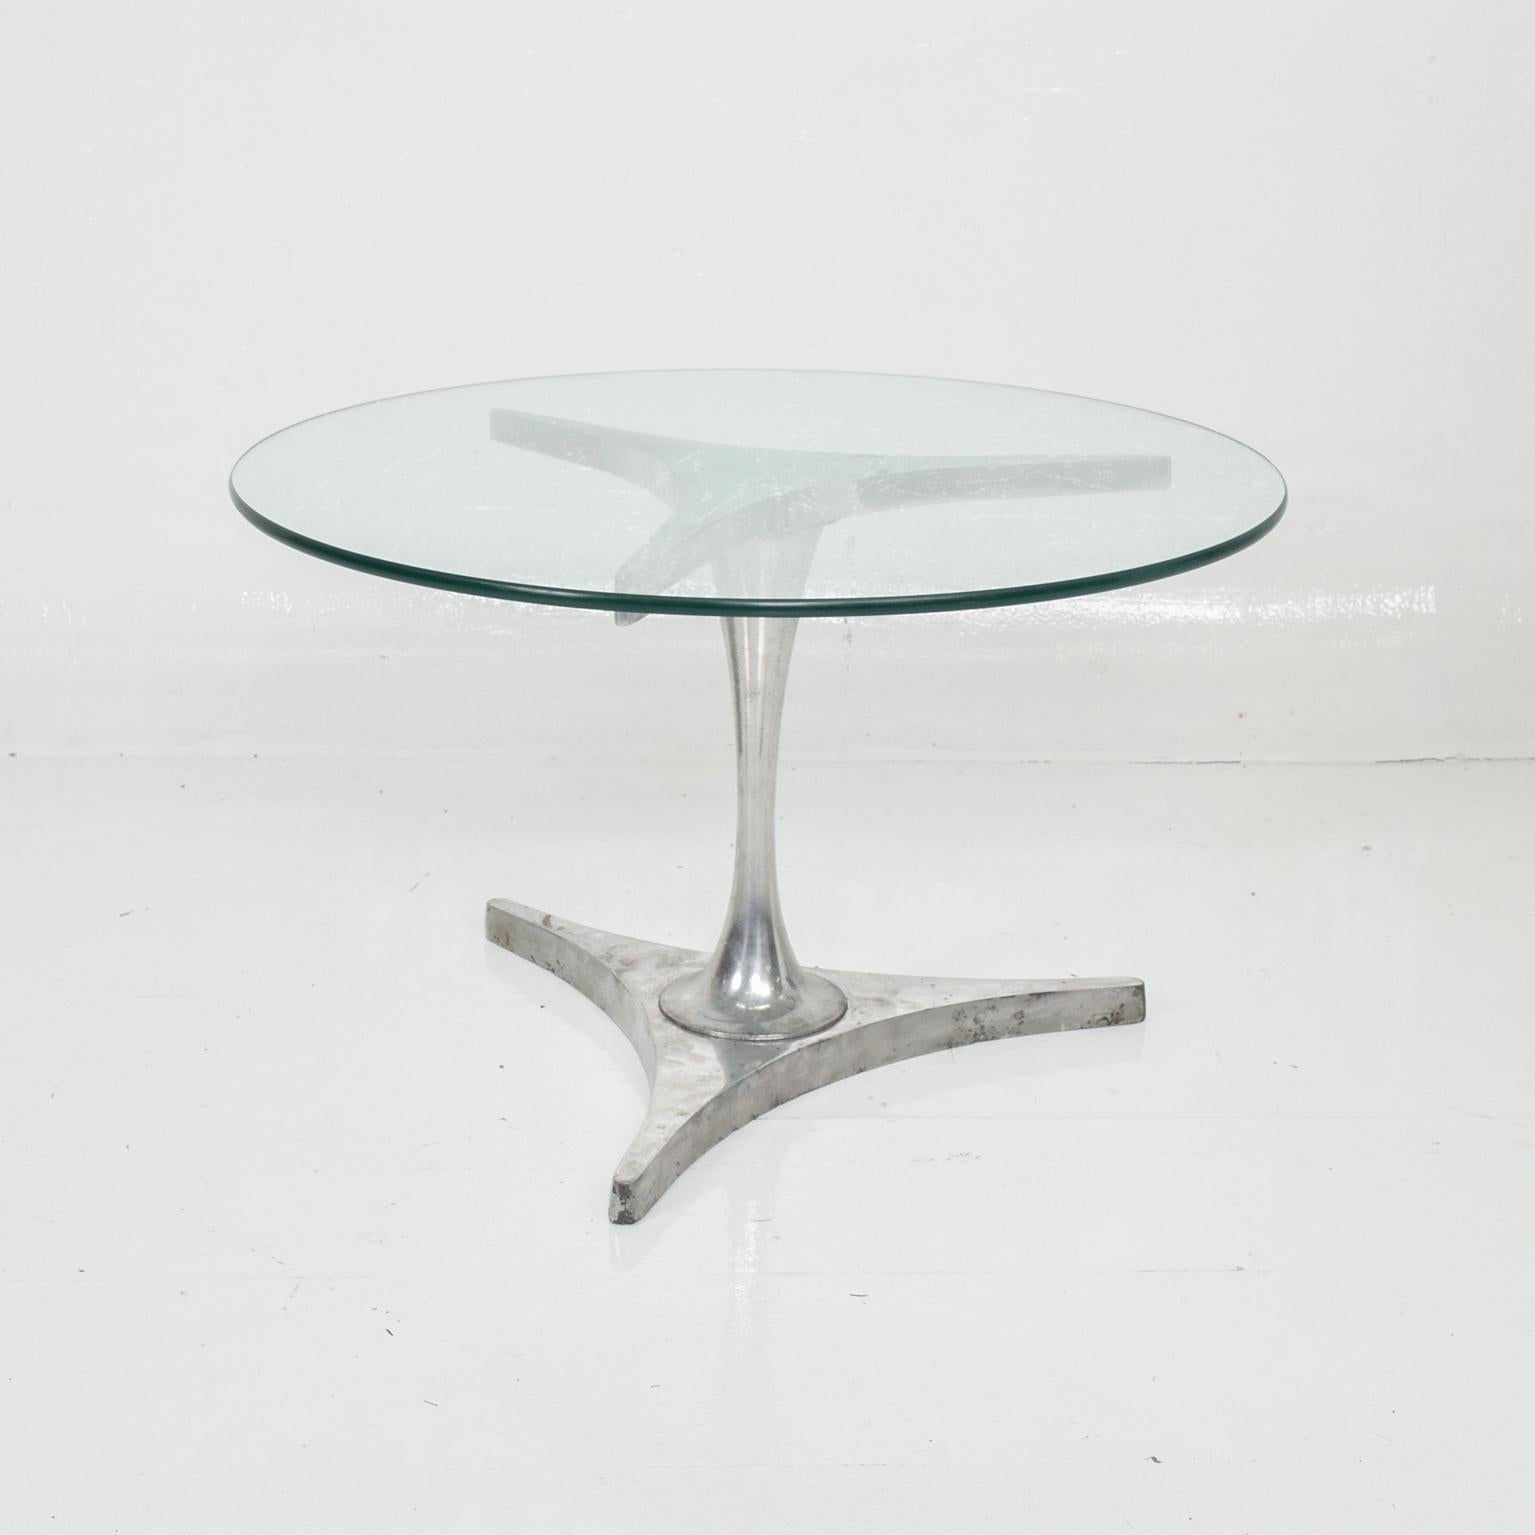 Double set of aluminum nesting tables set of two. USA 1960s
Mod Space Age Star trek triangular base.
Dimensions: 14.5 H x 17 .5 in diameter, (small) 20.5 H x 17.5 in diameter (large)
Original Unrestored preowned fair condition presentation.